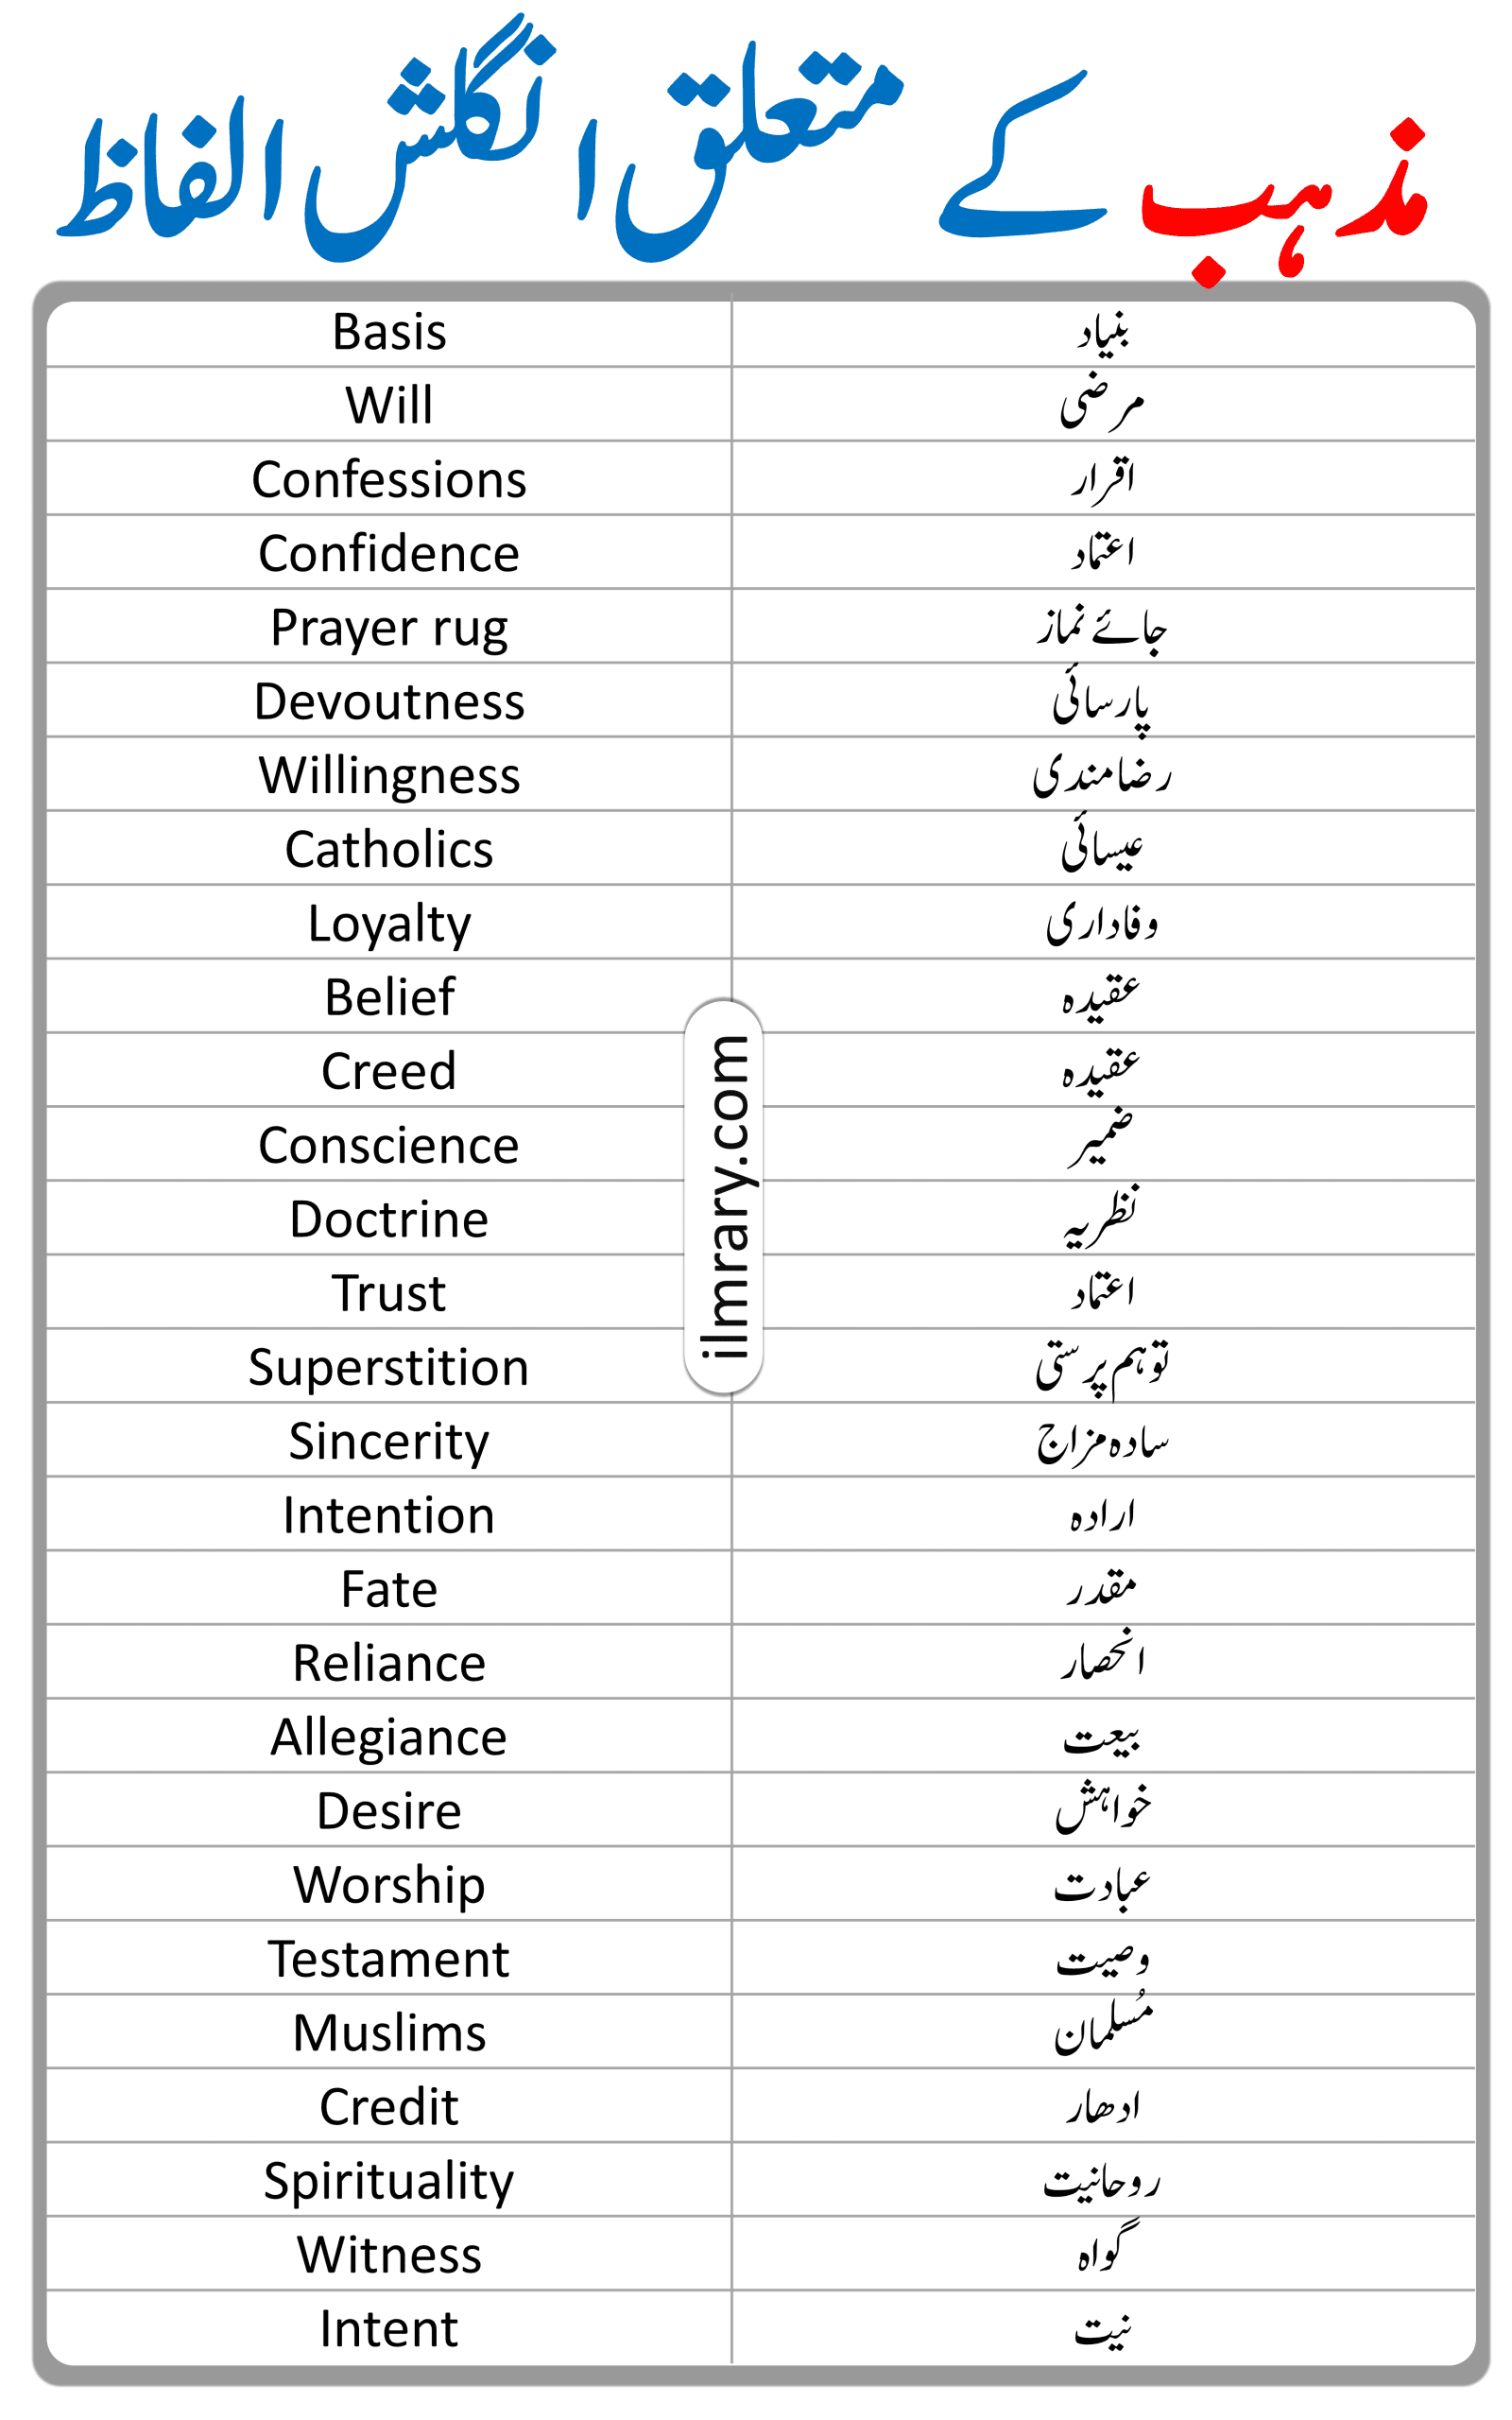 Religion Vocabulary in English with Urdu Meanings